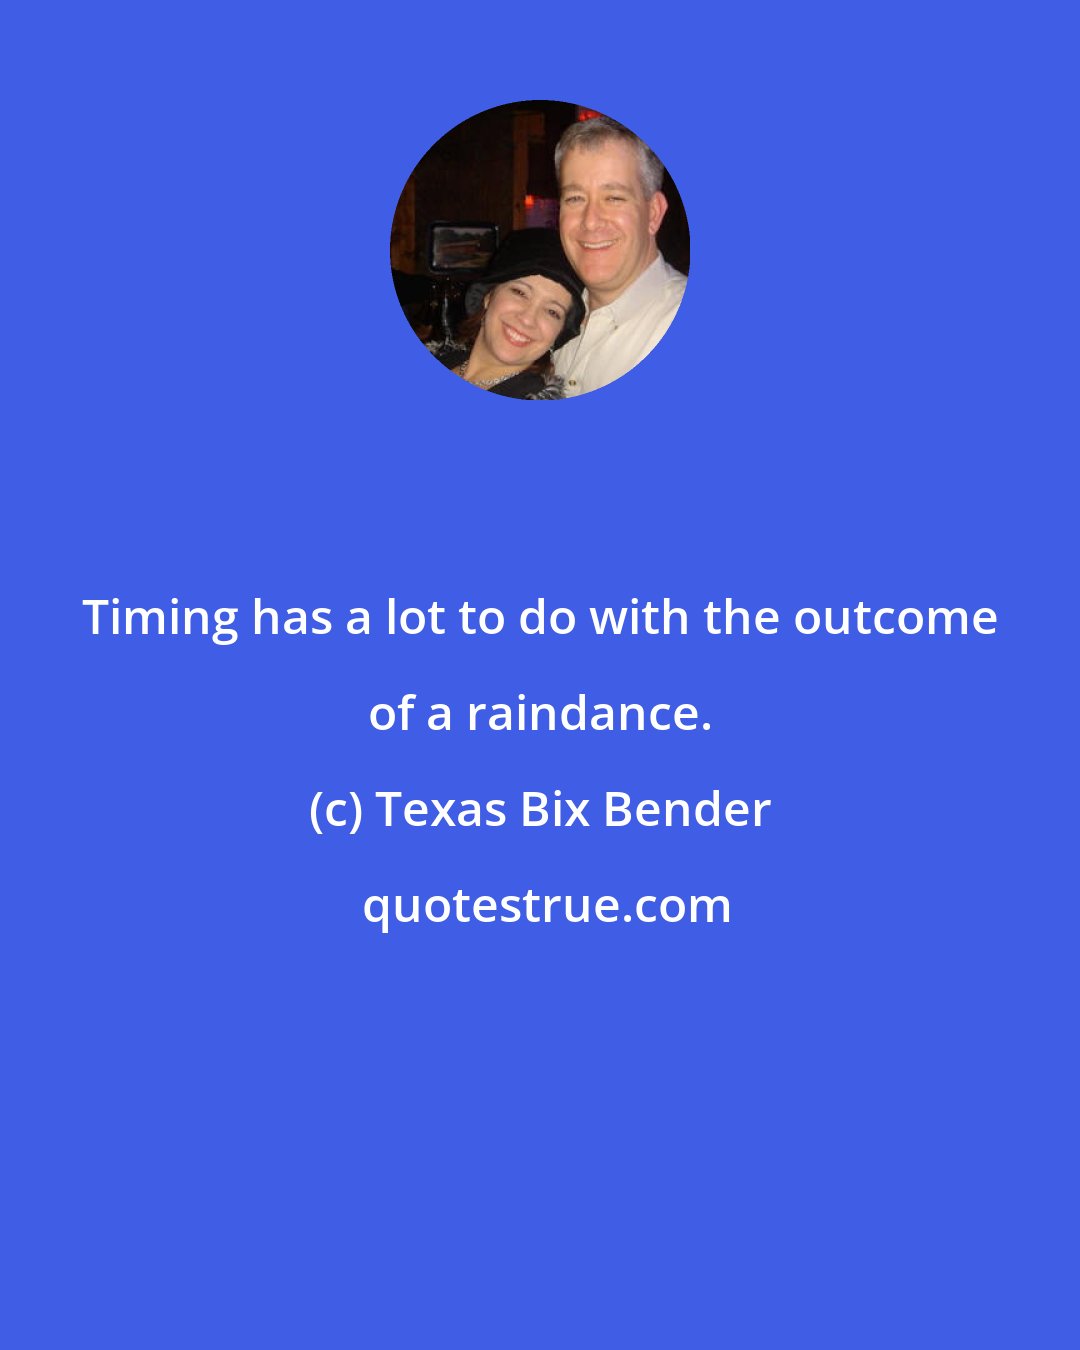 Texas Bix Bender: Timing has a lot to do with the outcome of a raindance.